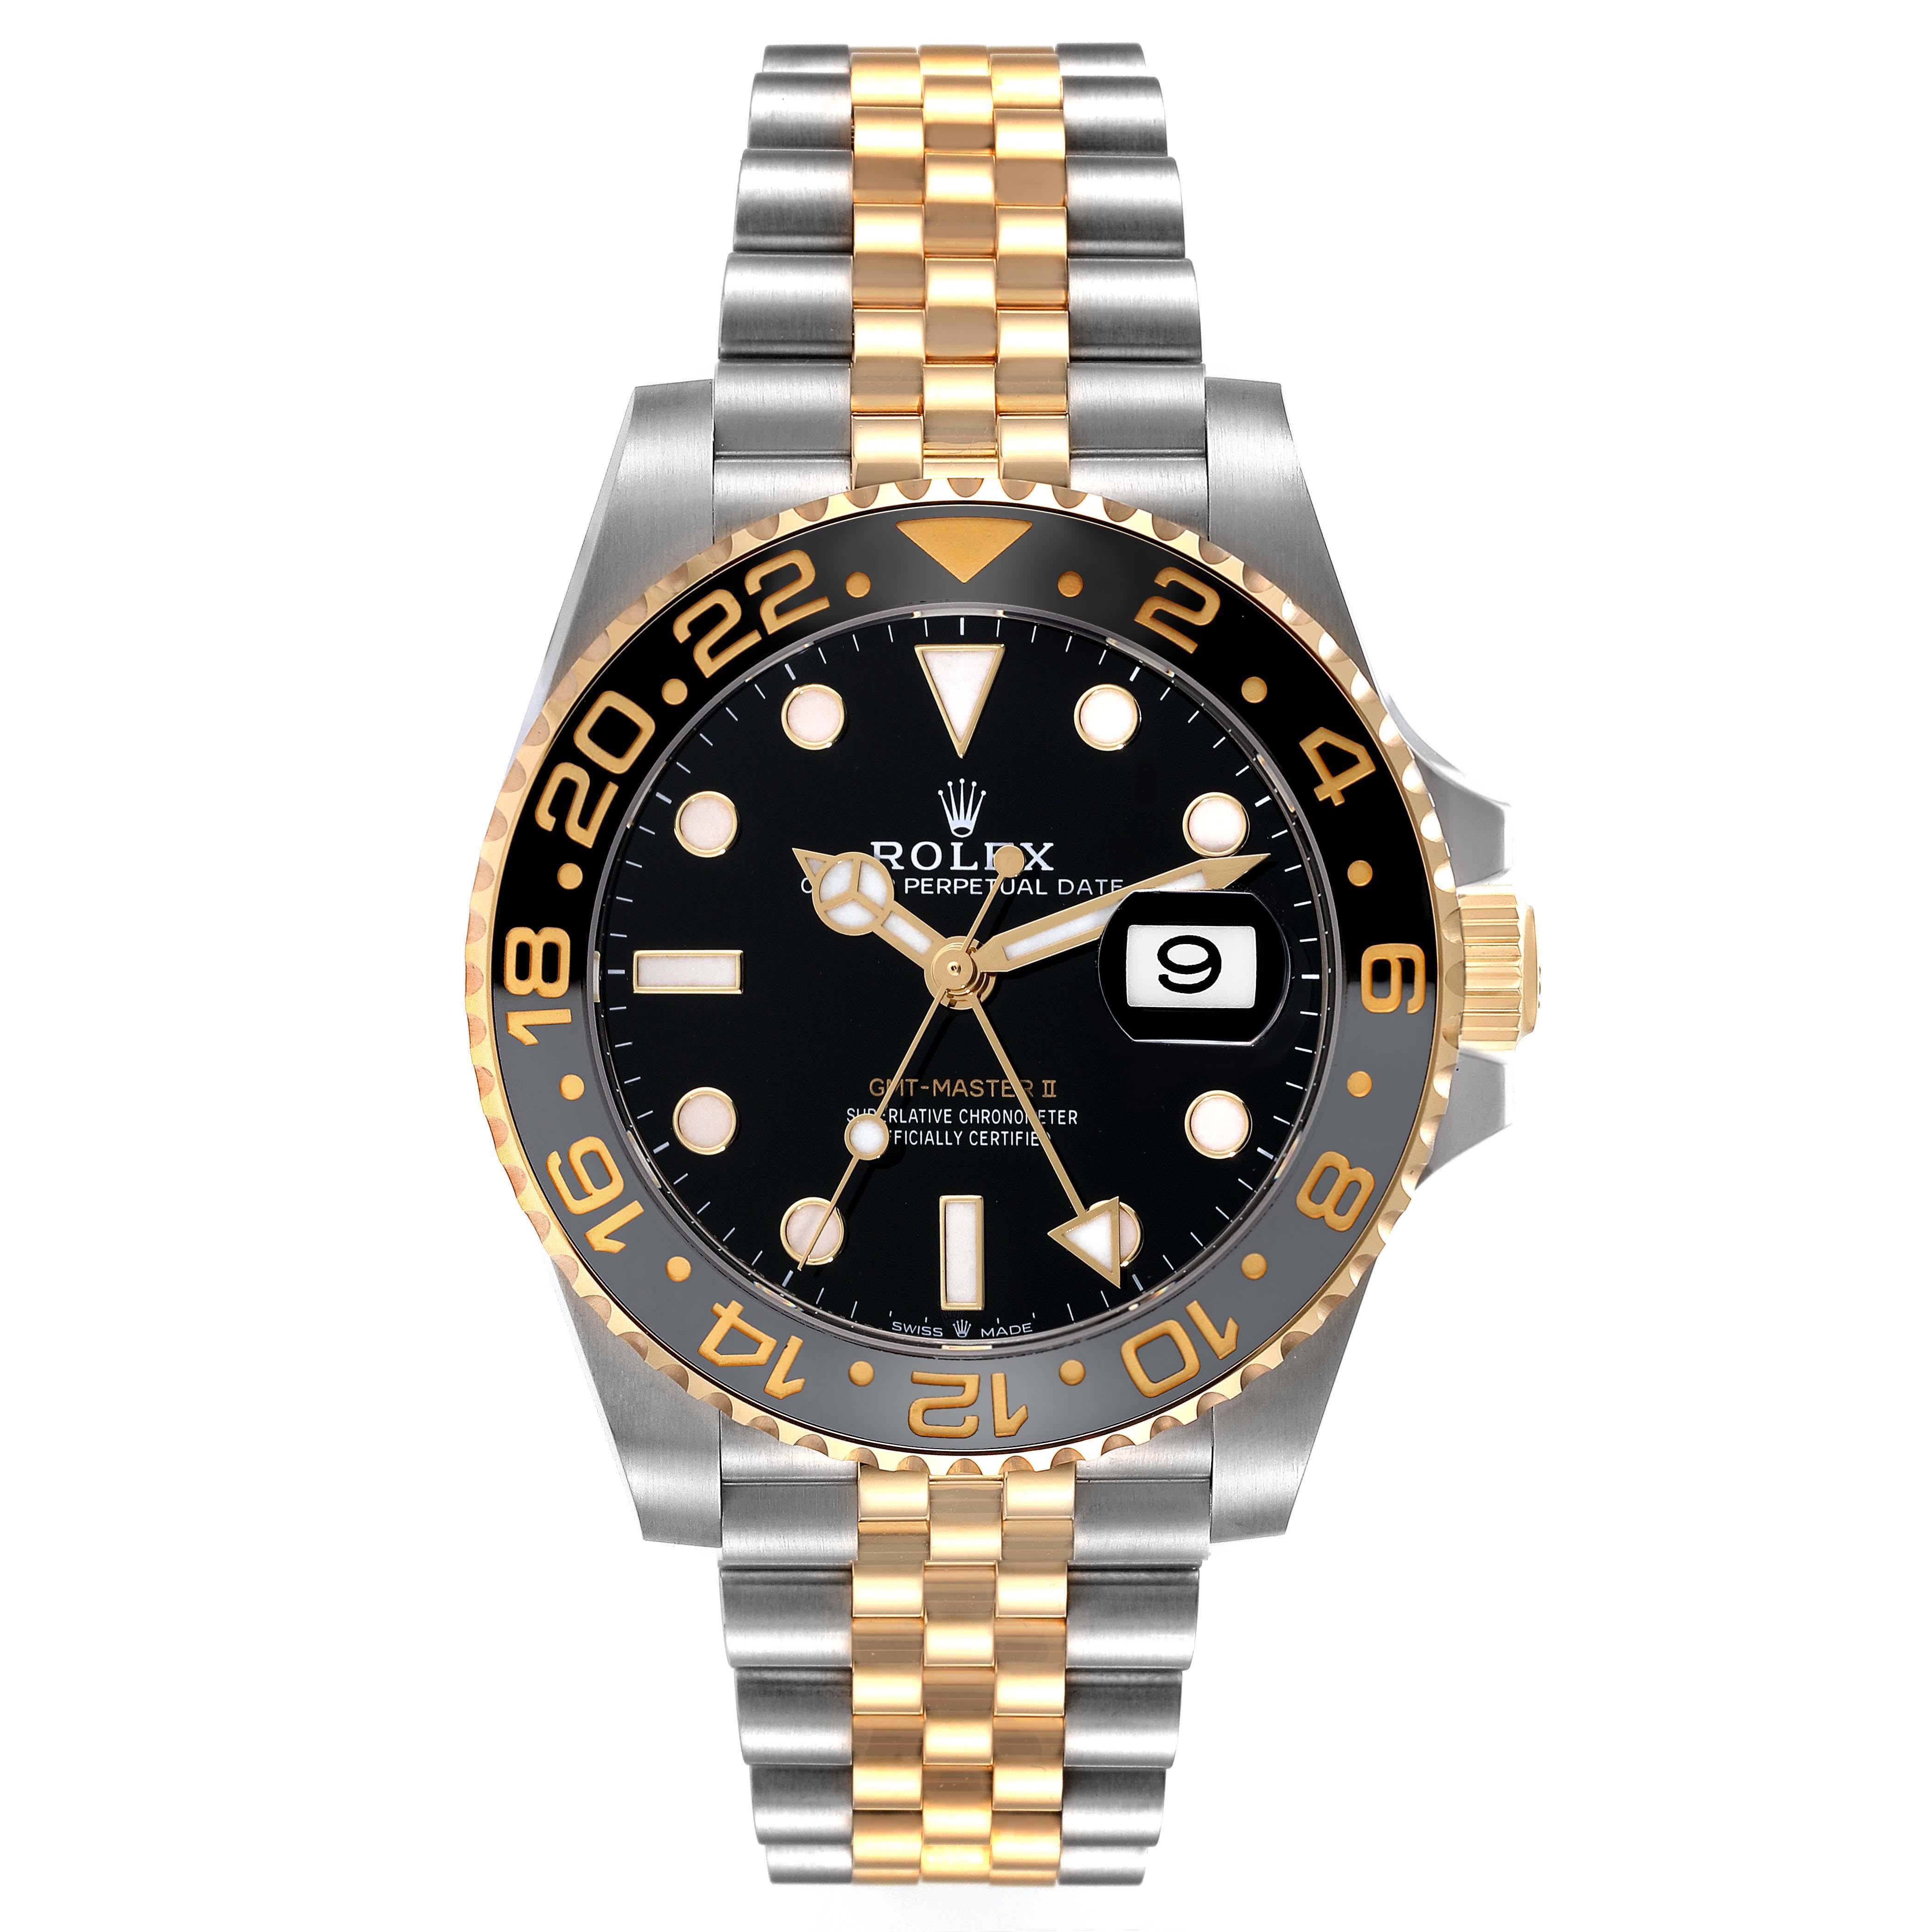 Rolex GMT Master II Yellow Gold Steel Grey Bezel Mens Watch 126713 Box Card. Officially certified chronometer automatic self-winding movement with GMT function. Stainless steel case 40 mm in diameter. Rolex logo on an 18k yellow gold crown. 18k